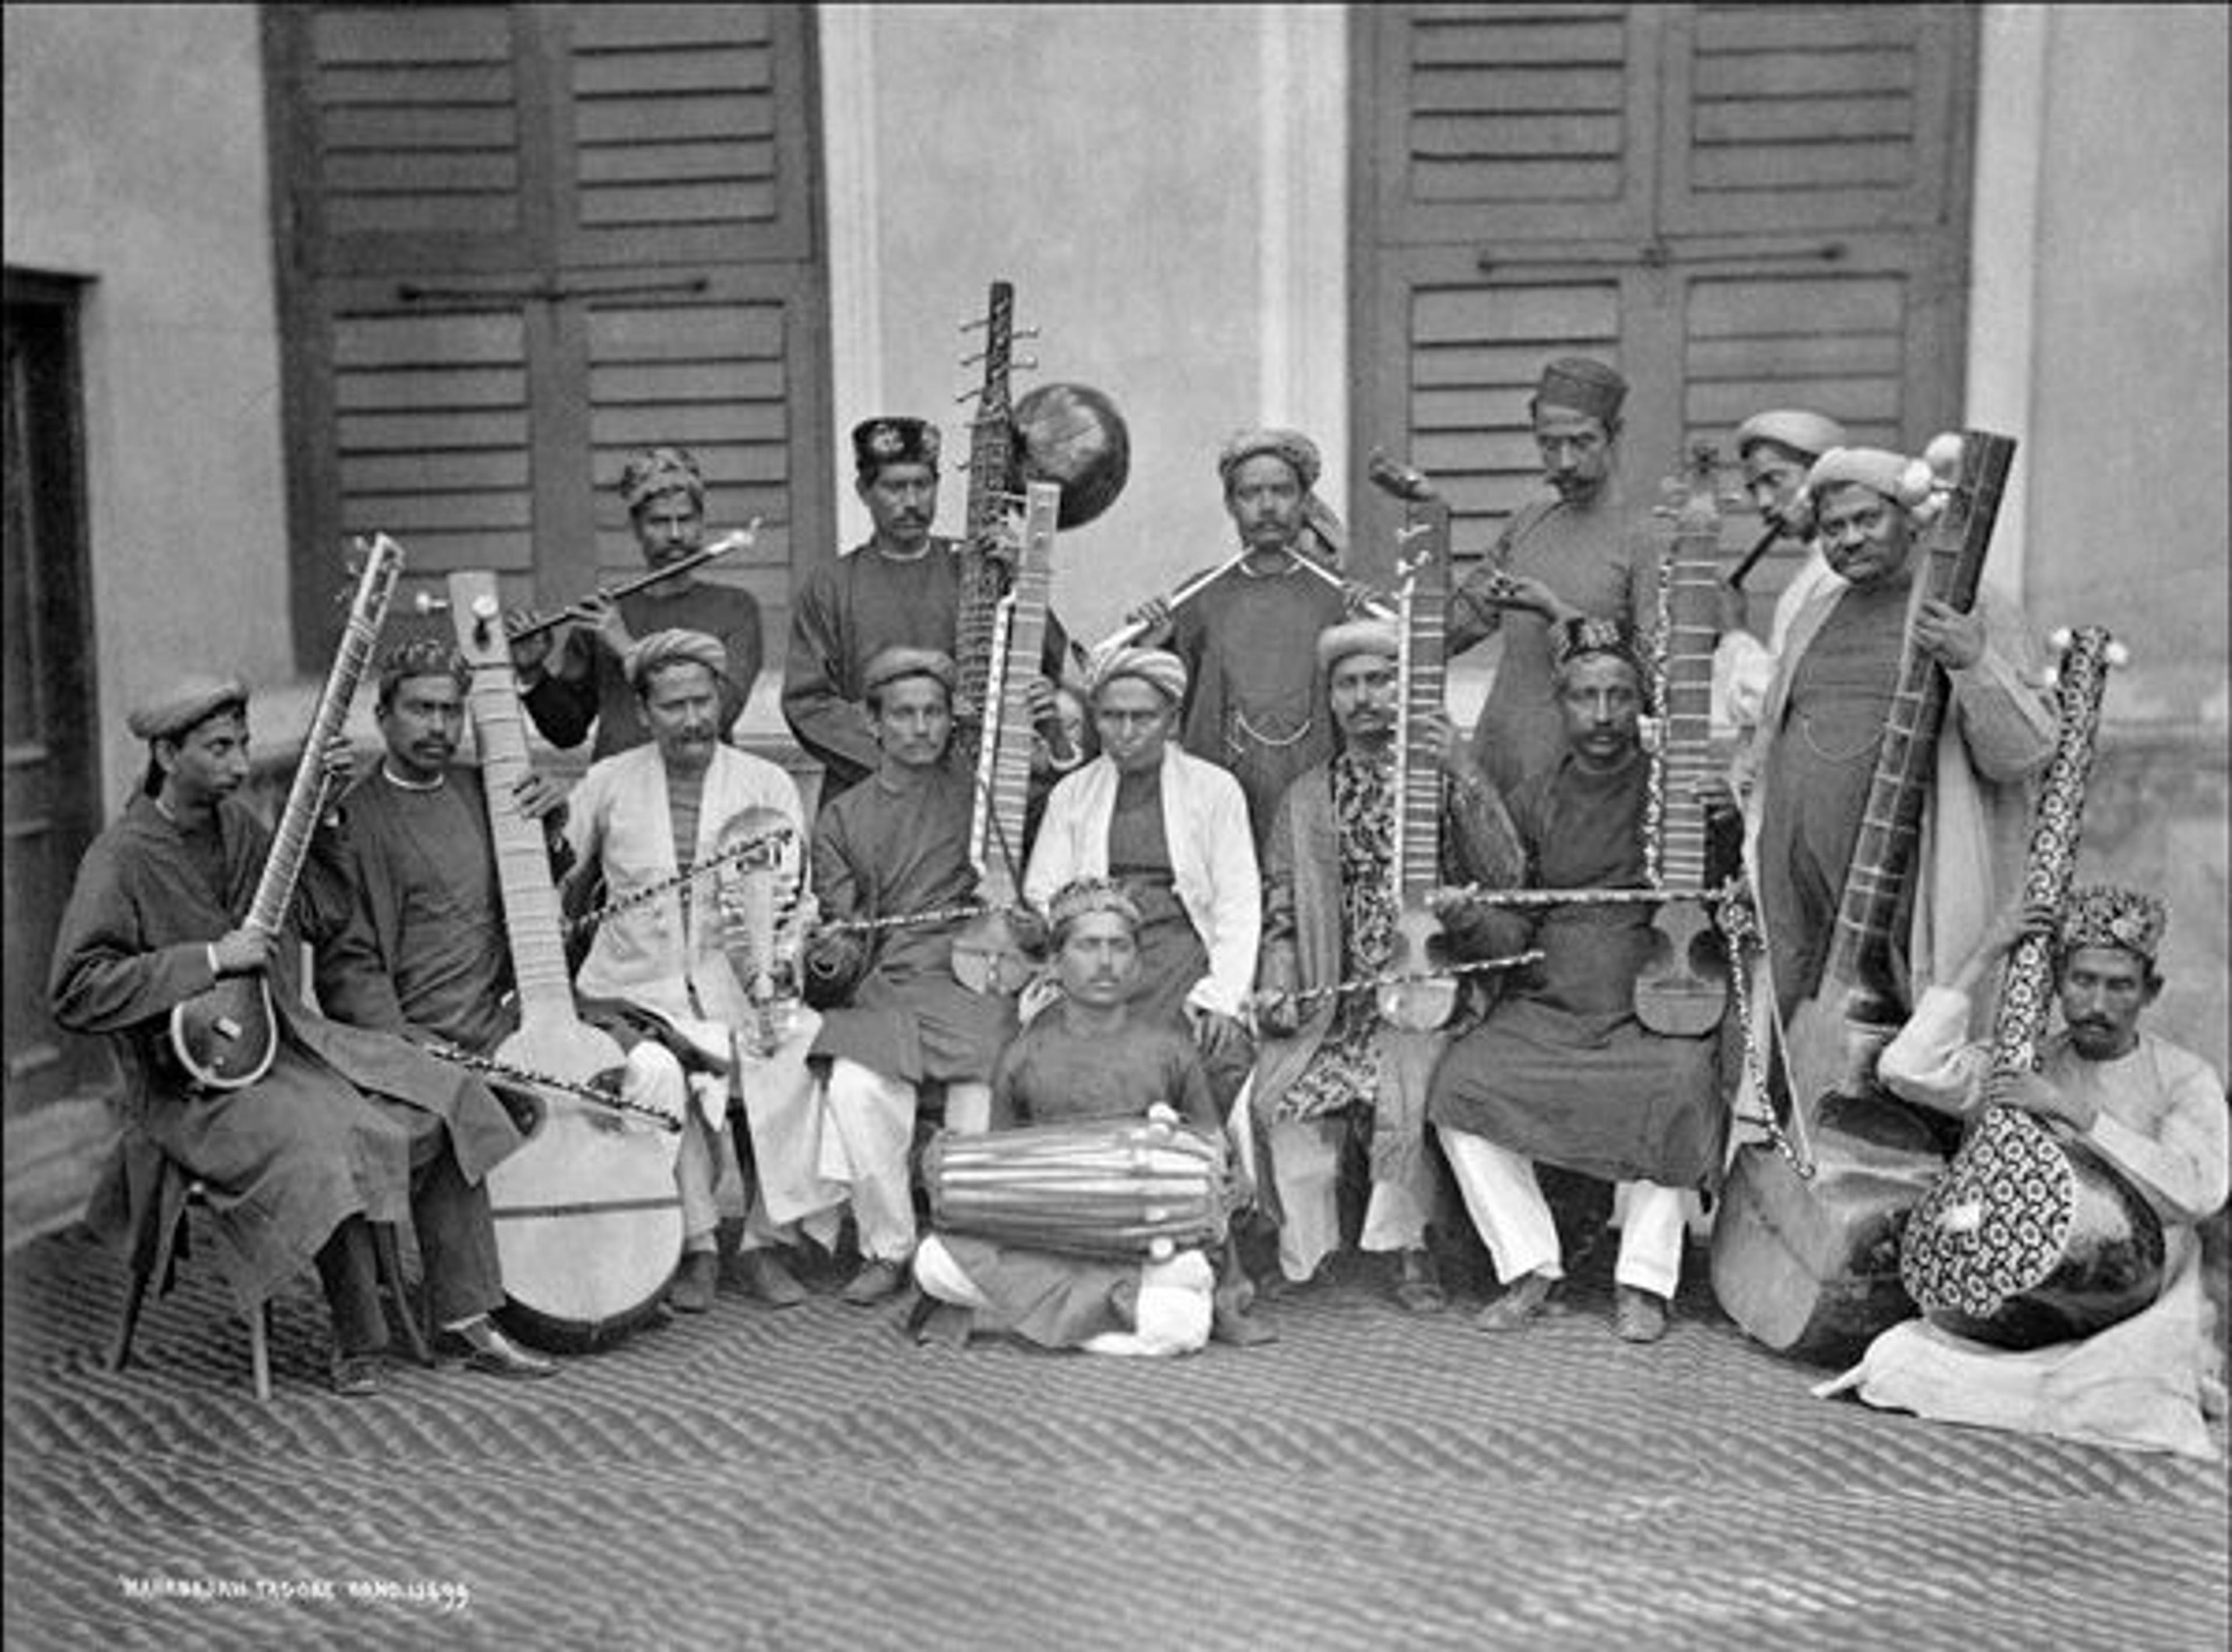 Sourindro Mohun Tagore's European-style orchestra